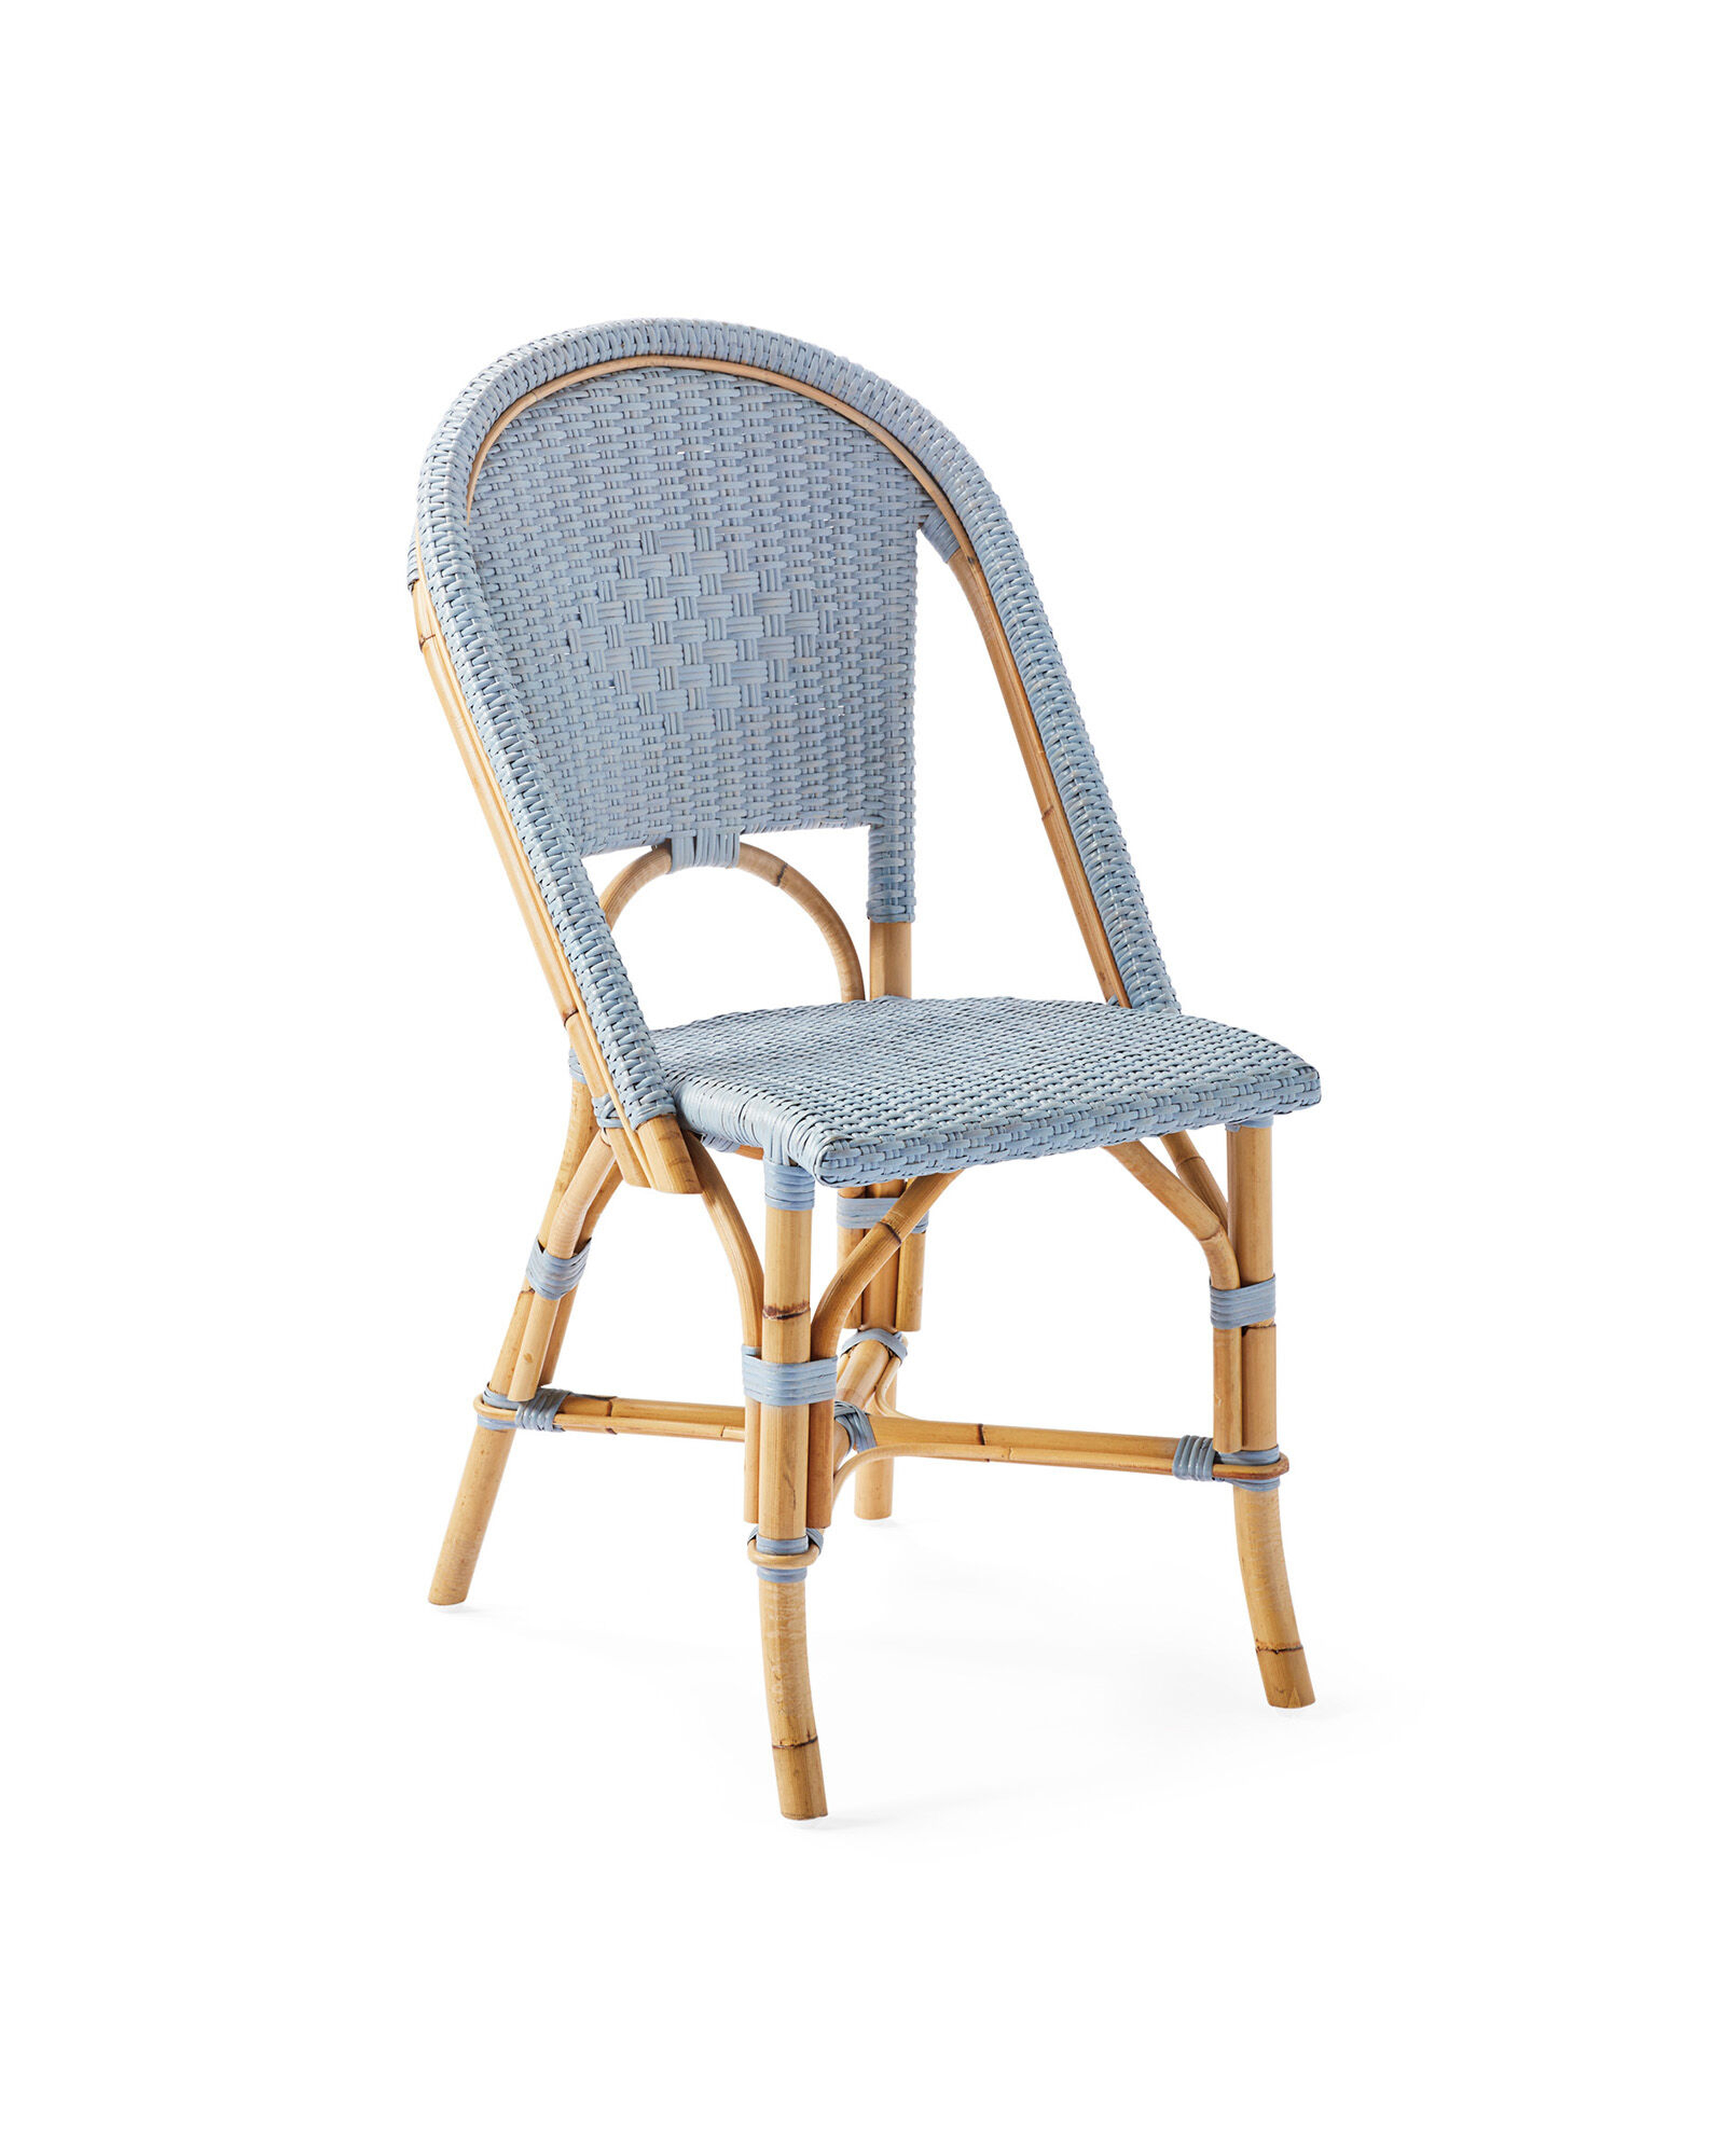 Sunwashed Riviera Rattan Dining Chair - Serena and Lily